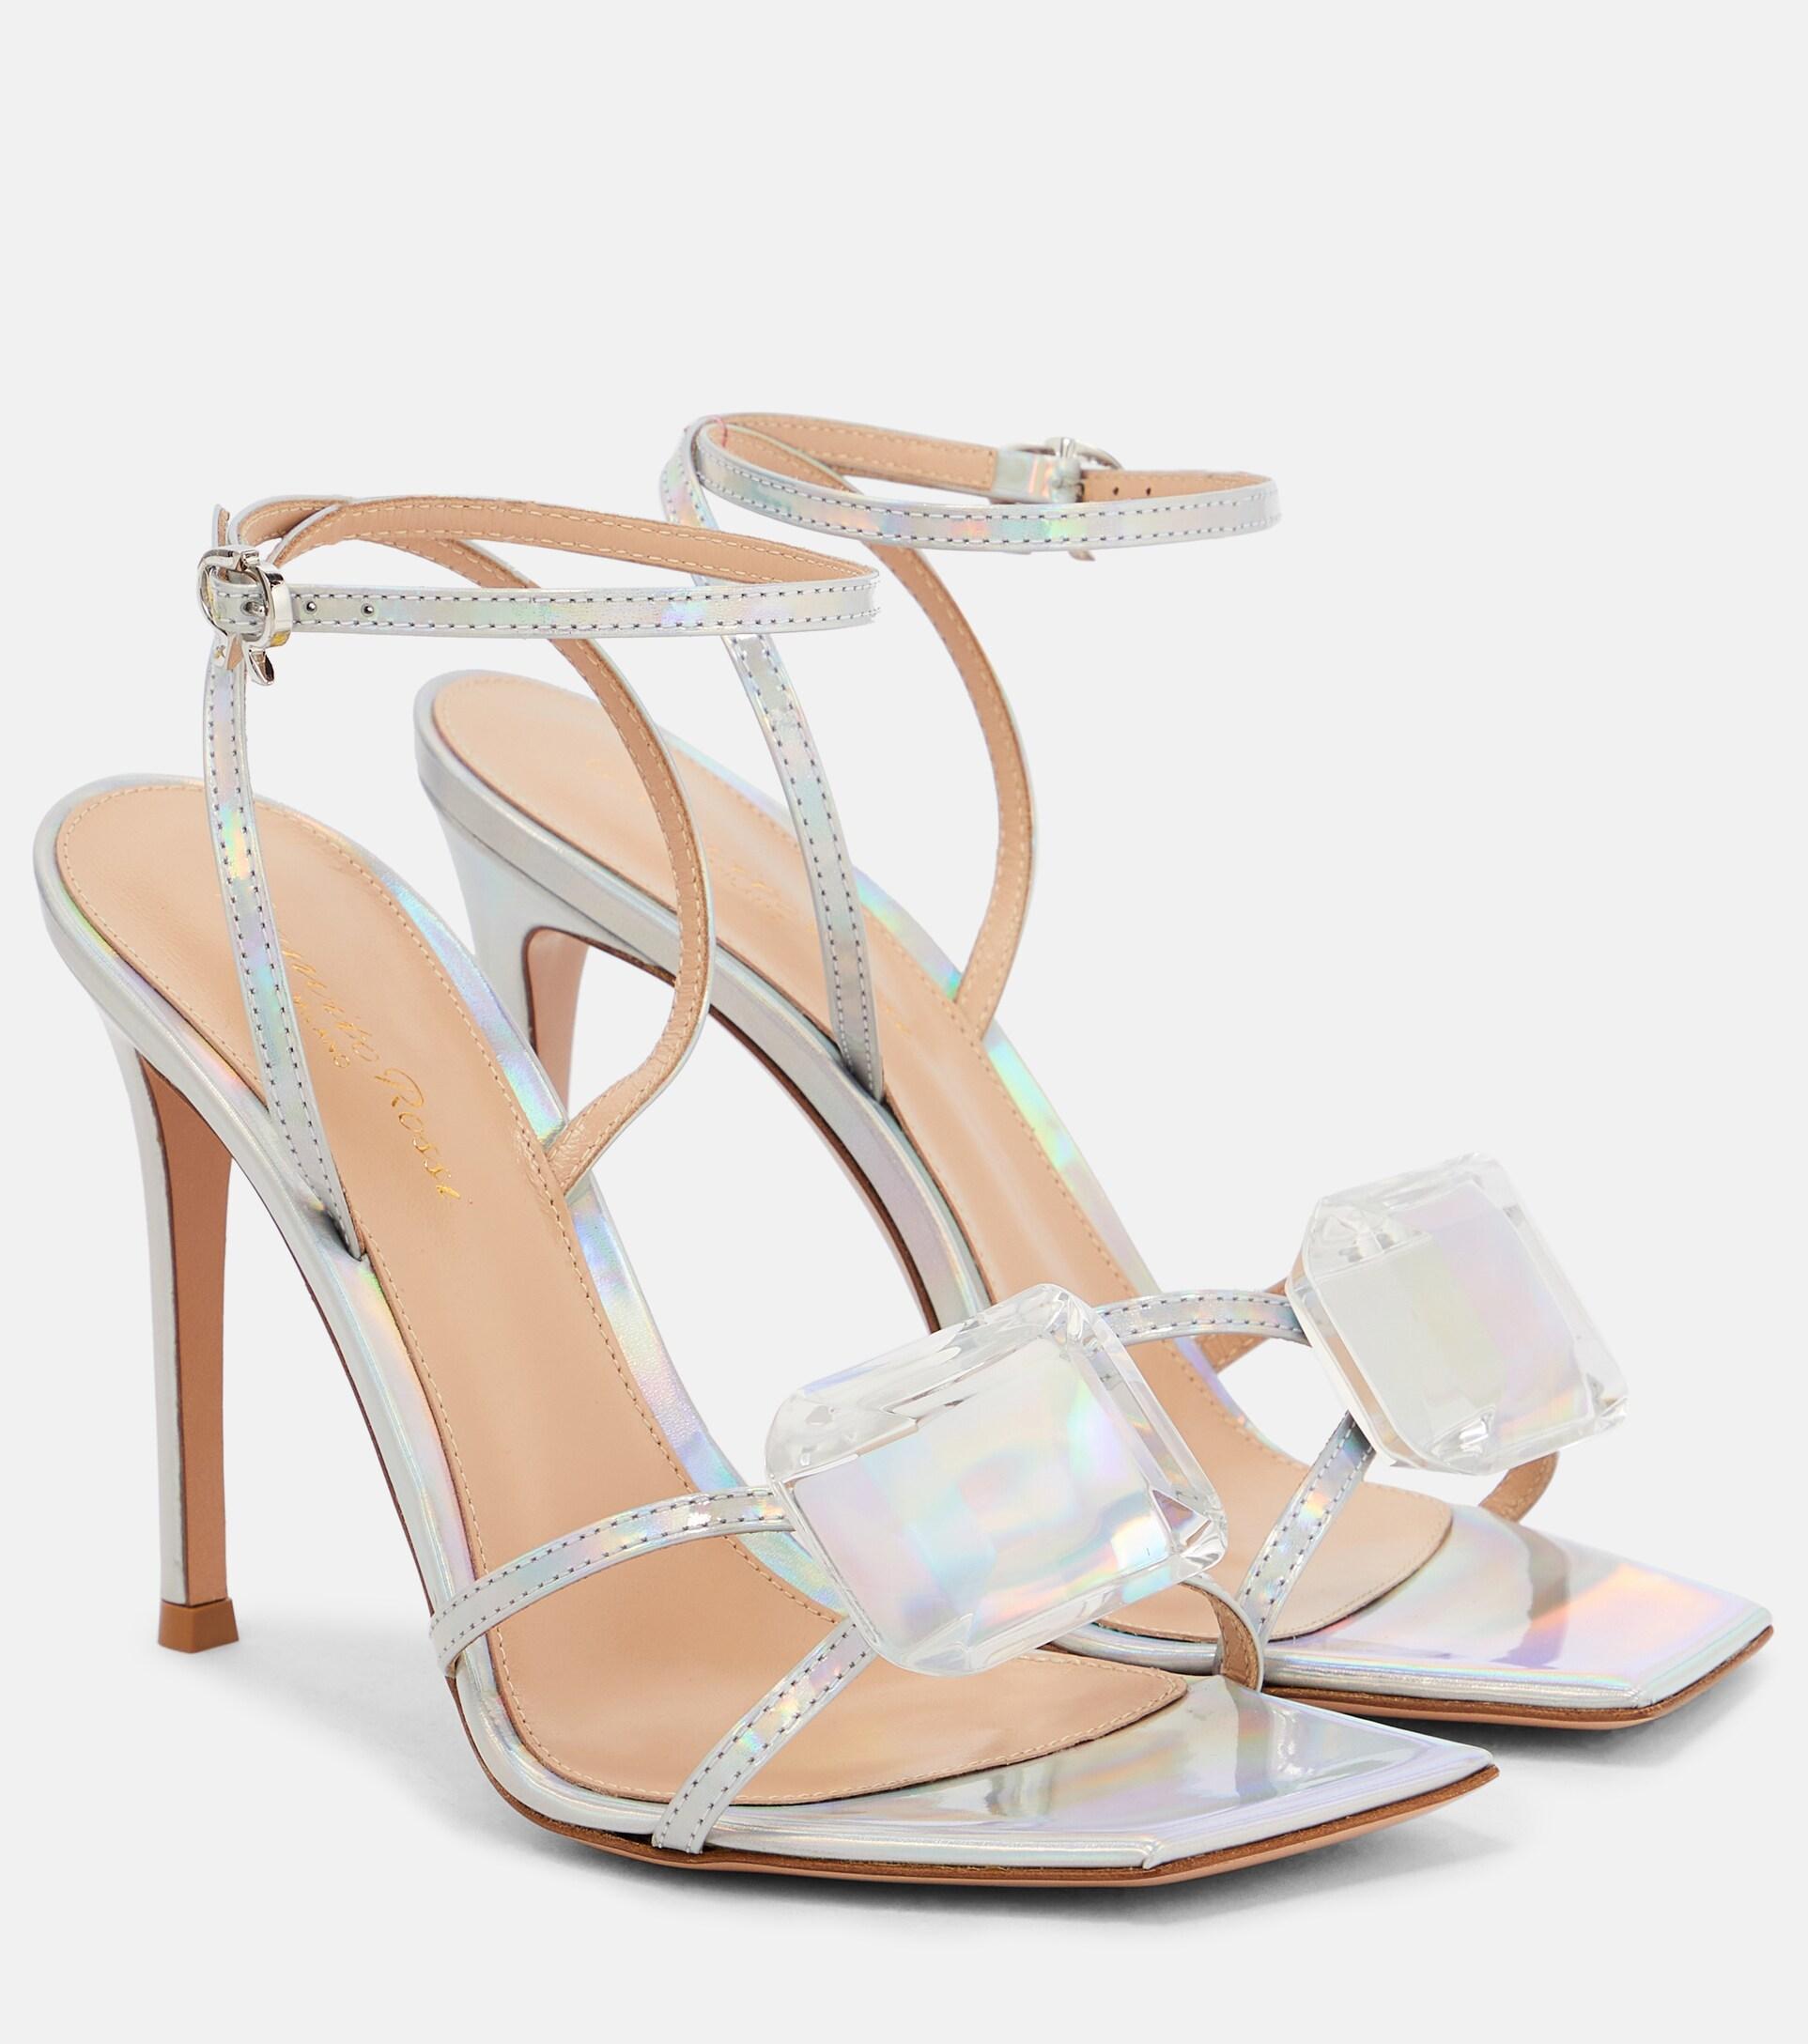 Gianvito Rossi Jaipur 105 Embellished Leather Sandals in White | Lyst